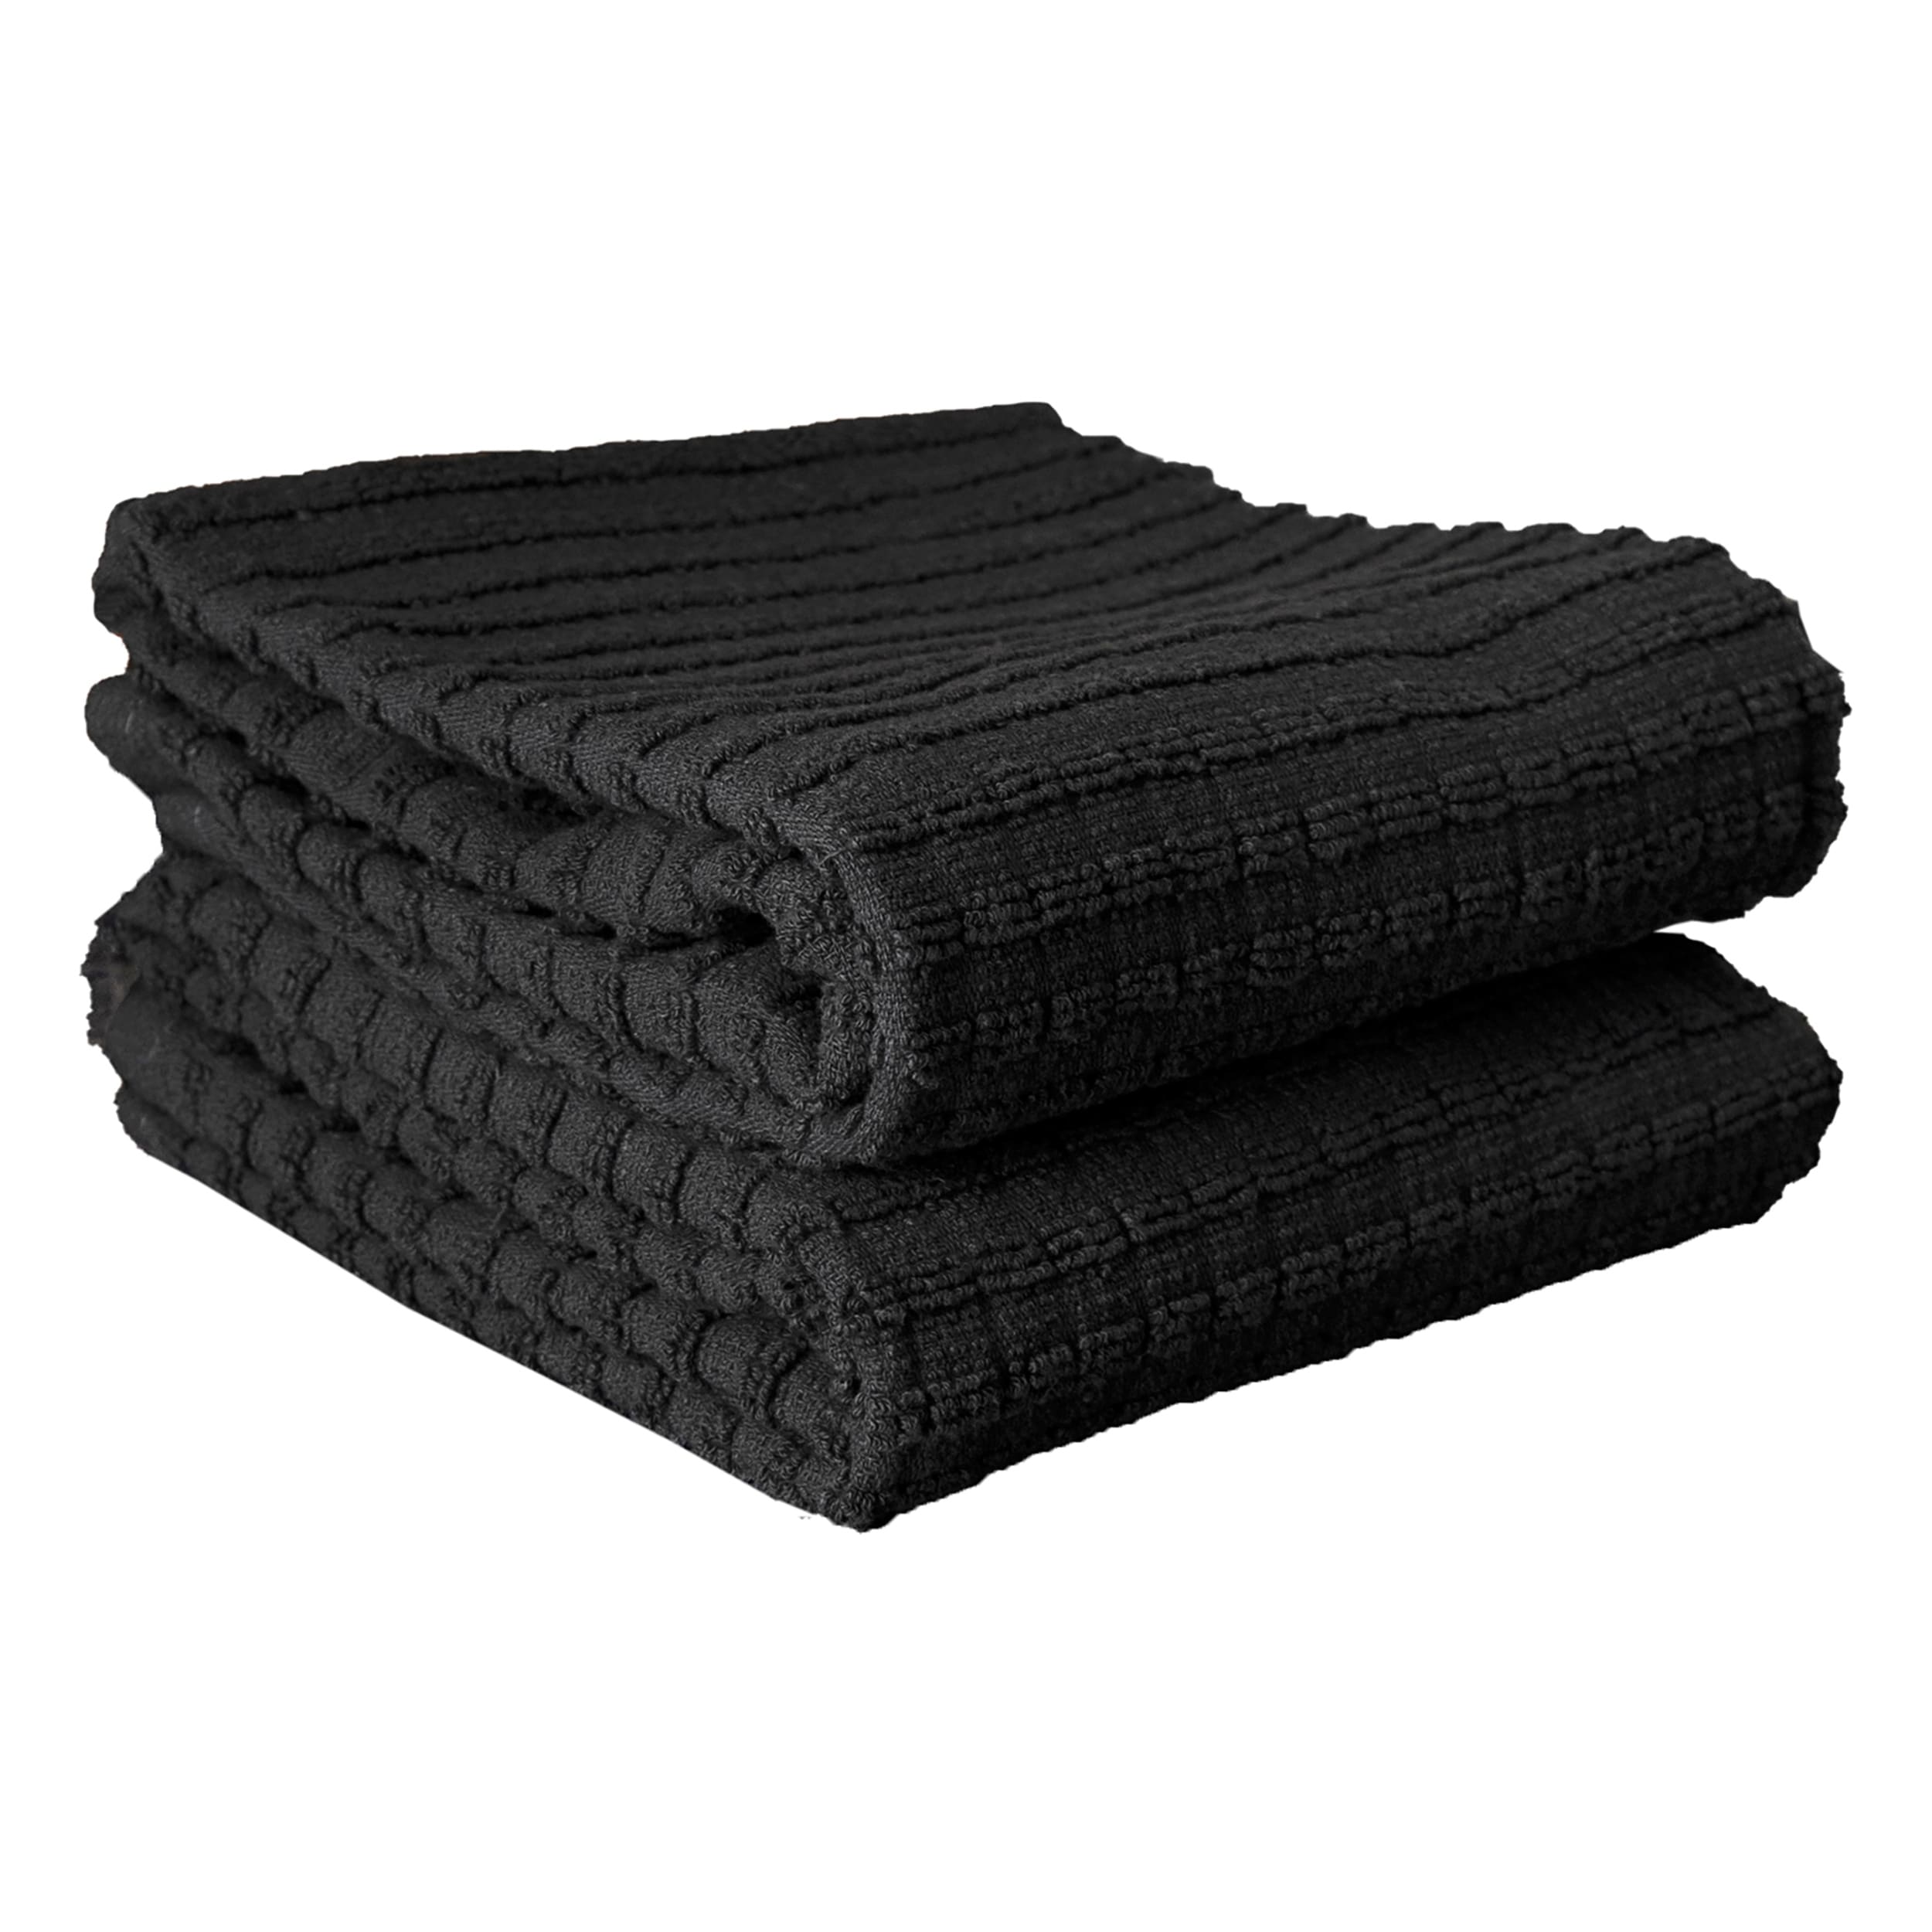 https://ak1.ostkcdn.com/images/products/is/images/direct/d88561b47d1e71ed96ab5817e7e1b8c00a25b943/Royale-Solid-Black-Cotton-Kitchen-Towels-%28Set-of-2%29.jpg